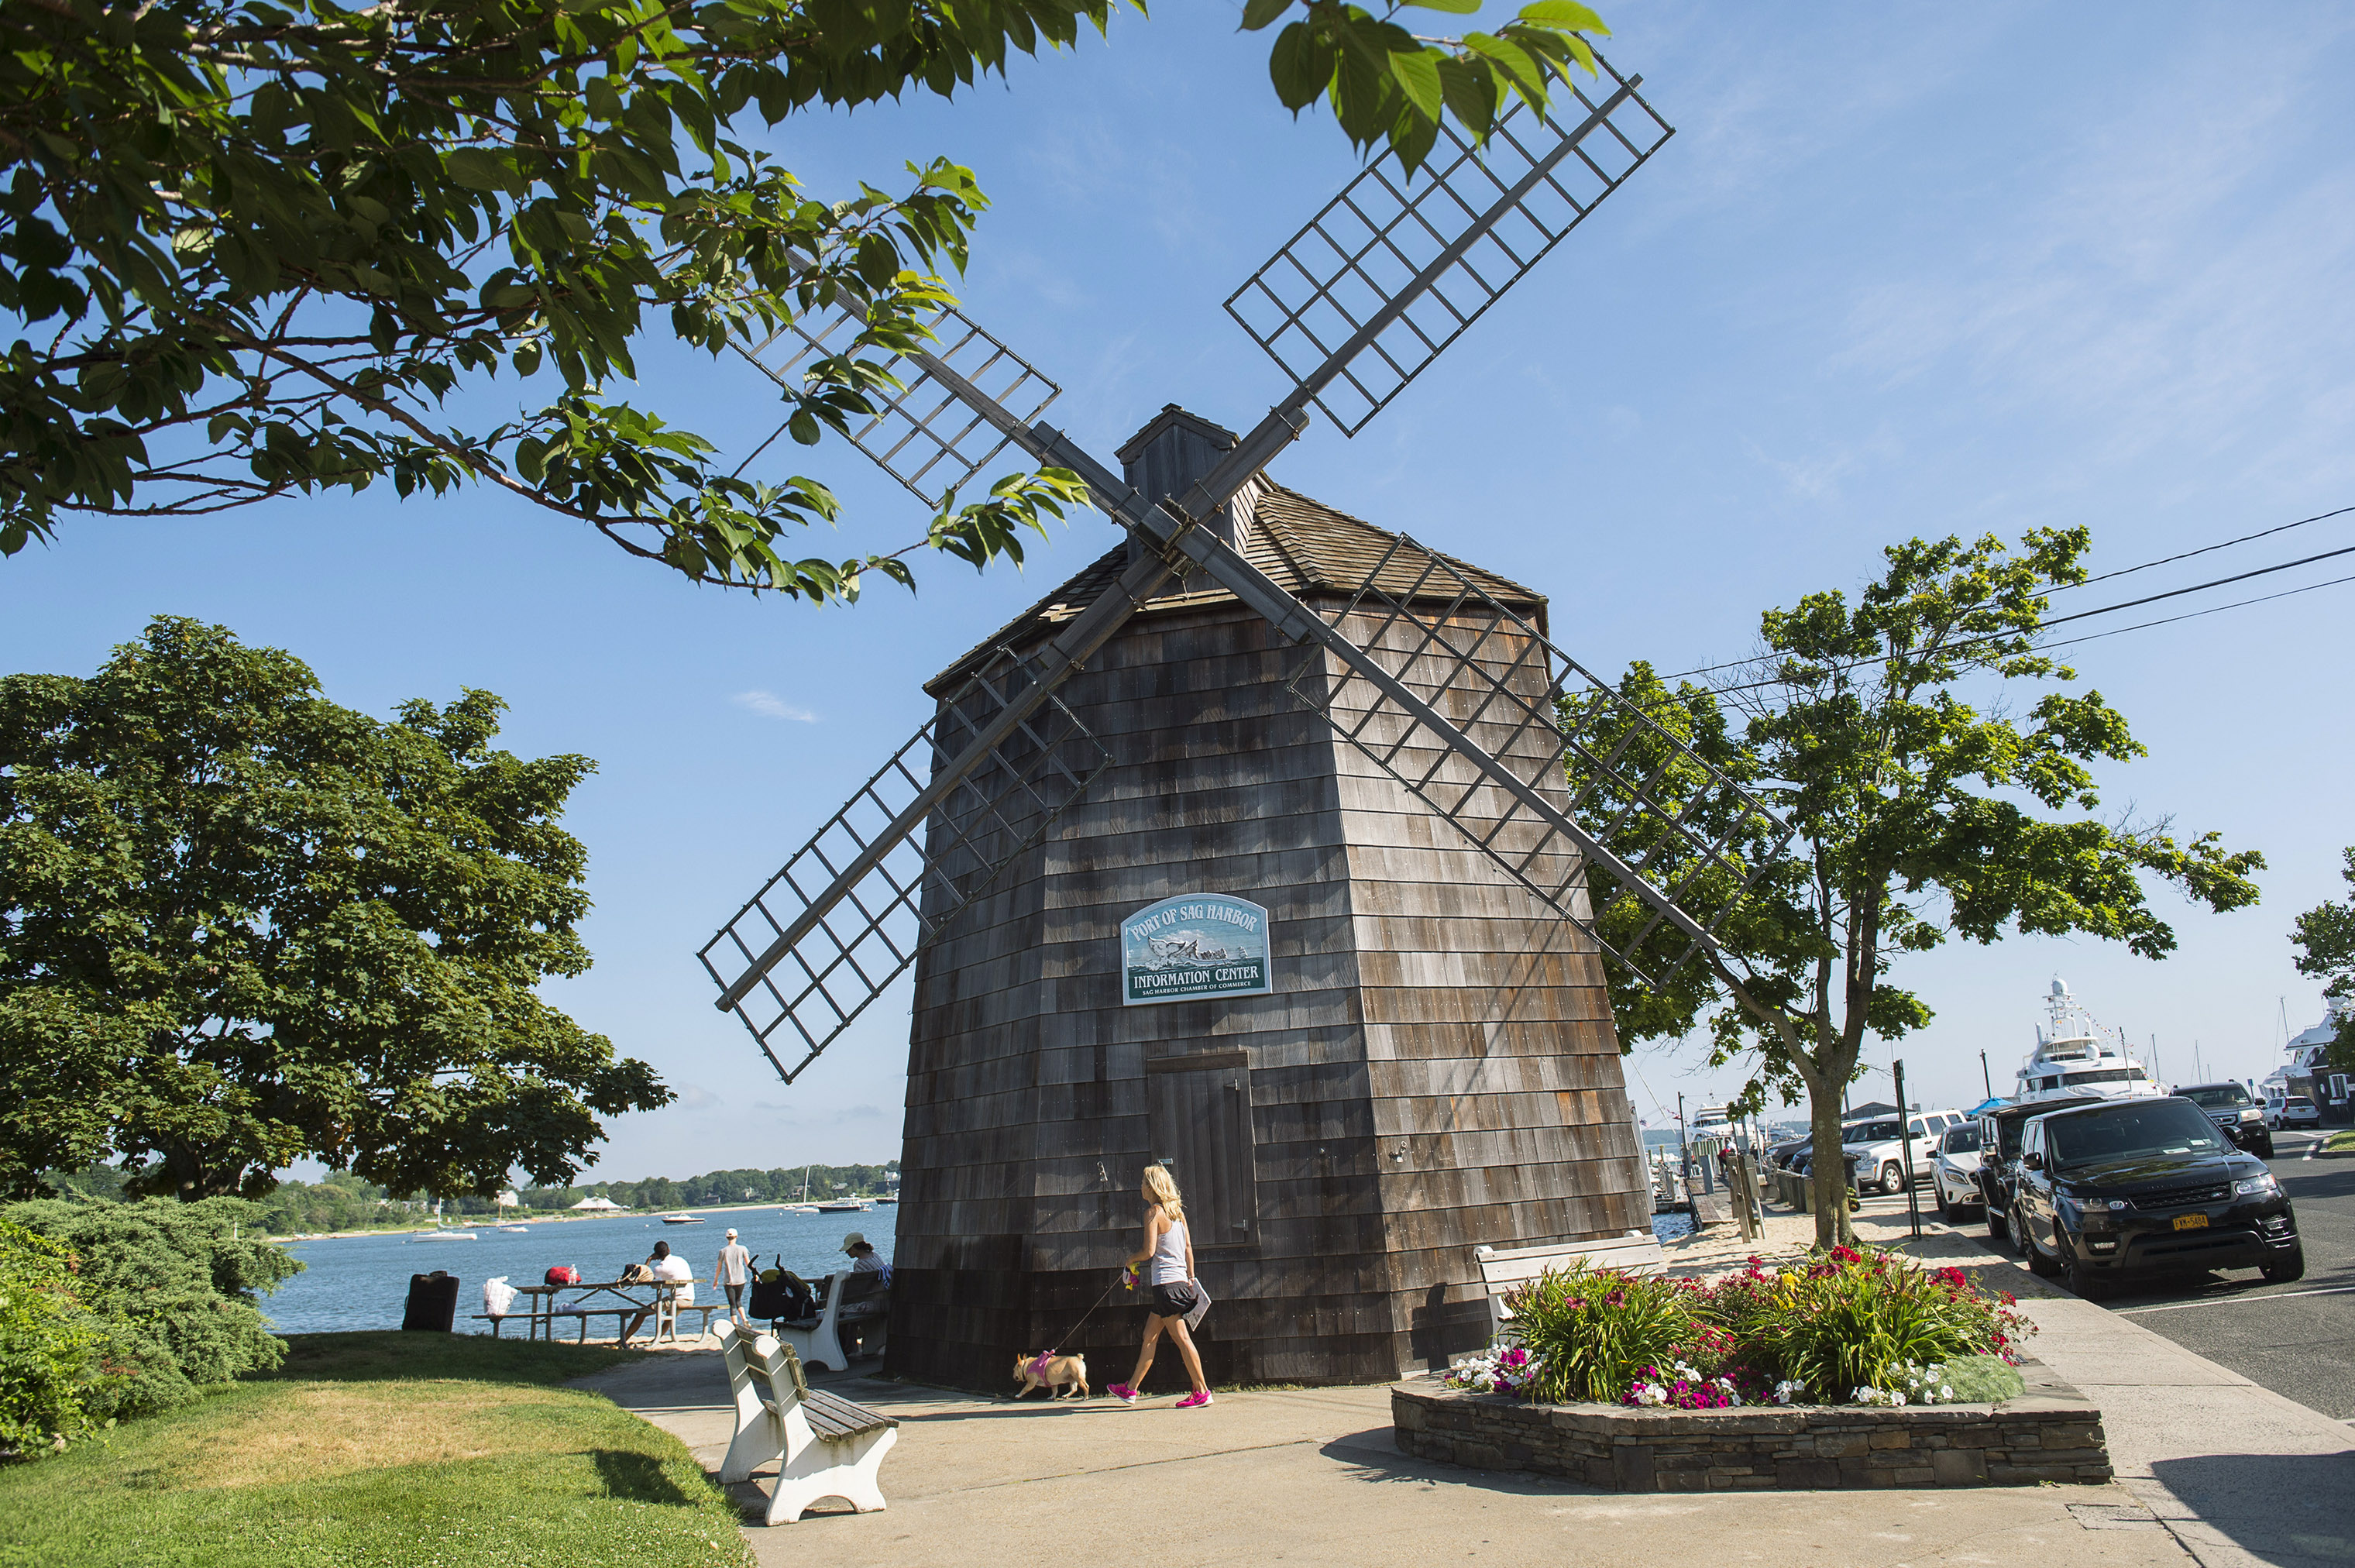 Village history is everywhere, from mom-and-pop shops to the windmill near Main Street.